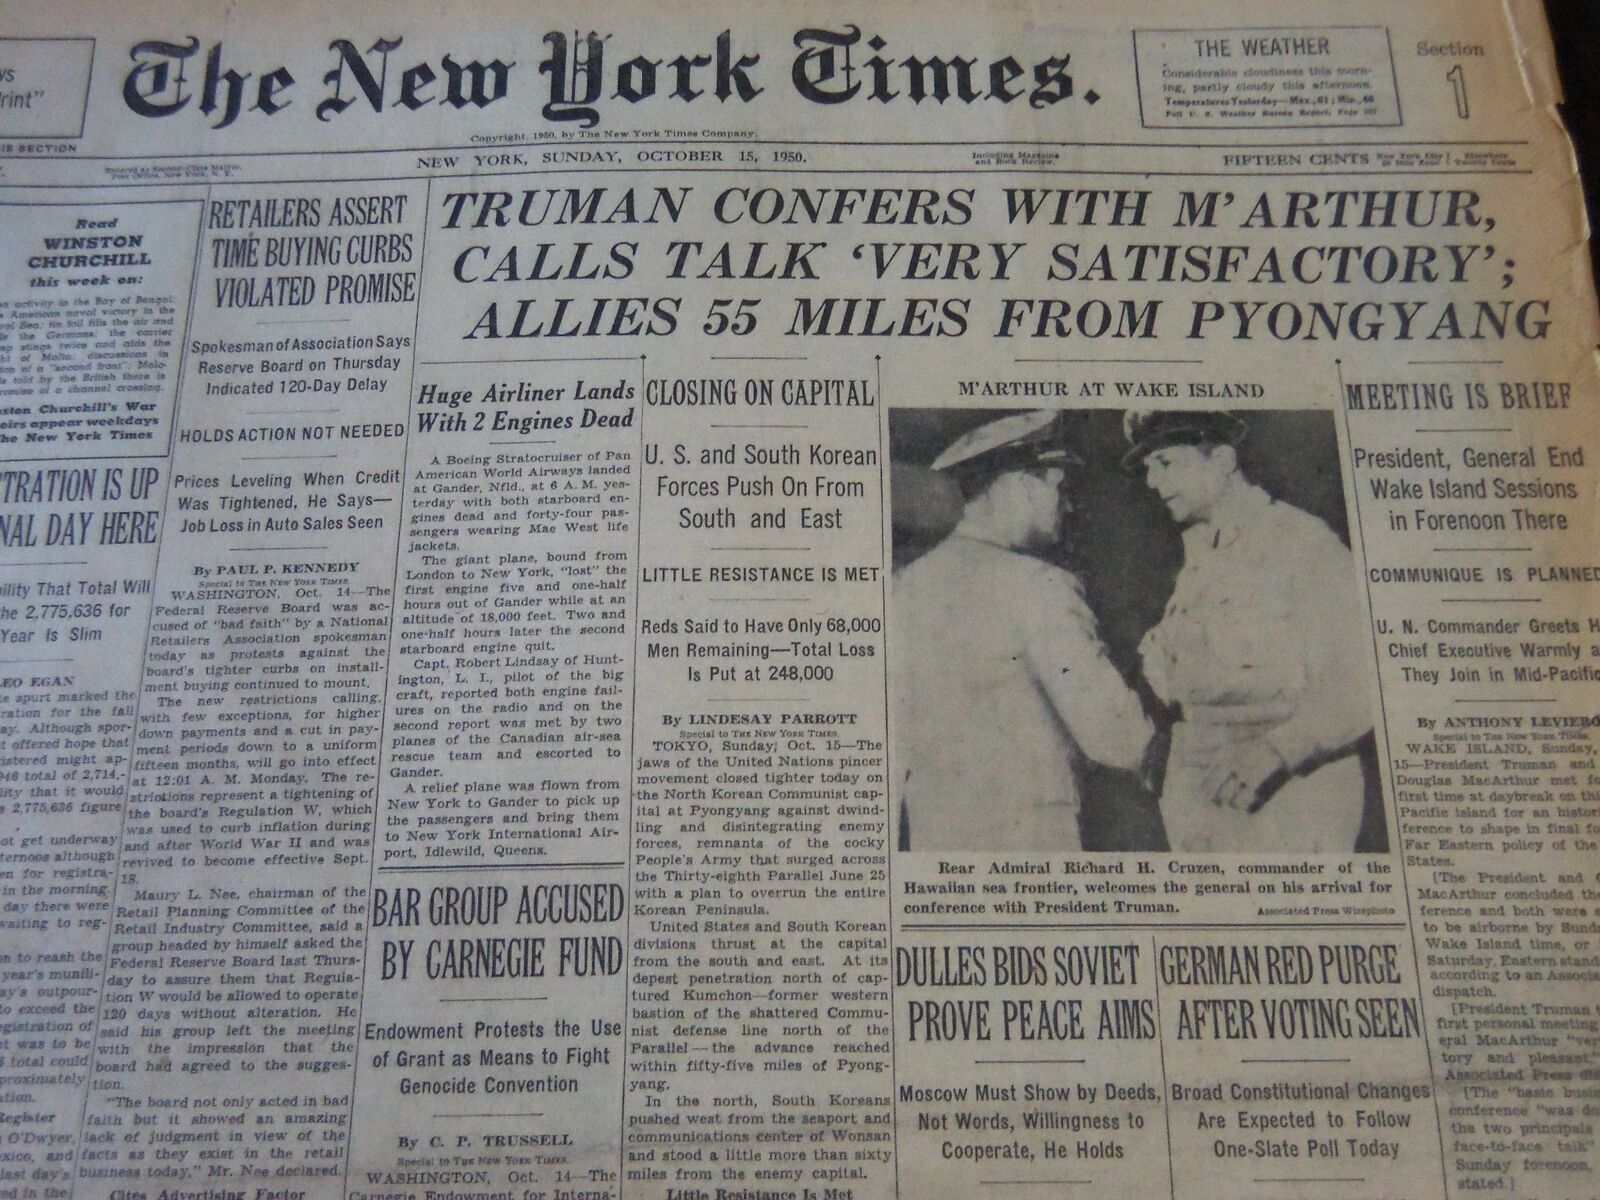 1950 OCTOBER 15 NEW YORK TIMES - TRUMAN CONFERS WITH M'ARTHUR - NT 5794